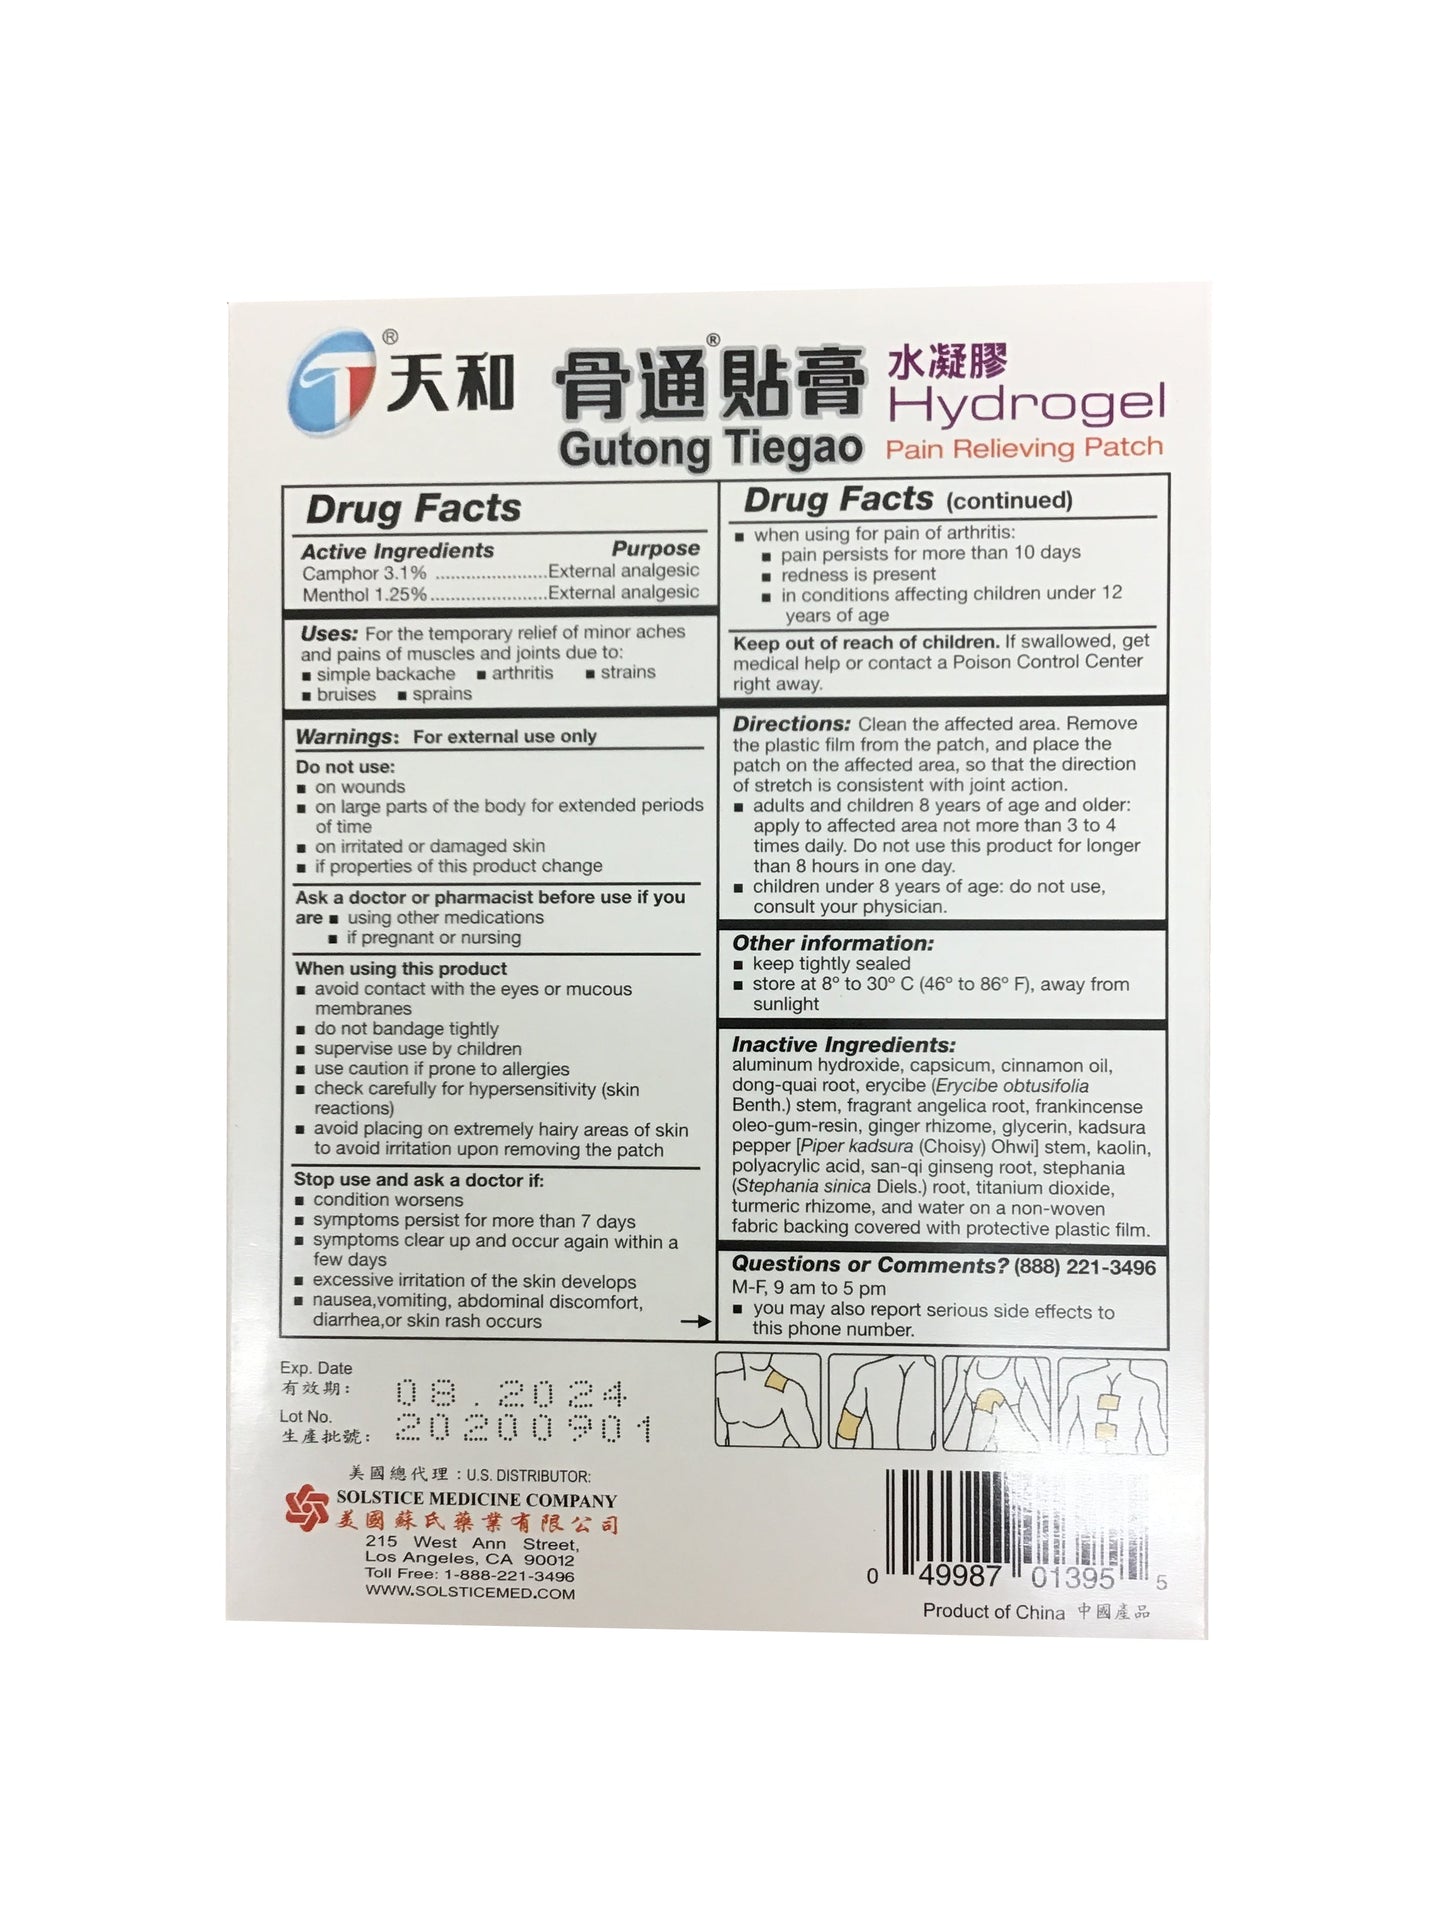 Gutong Tiegao Hydrogel Pain Relieving Patch (6 Patches) 天和 水凝膠骨诵貼膏(6貼裝)